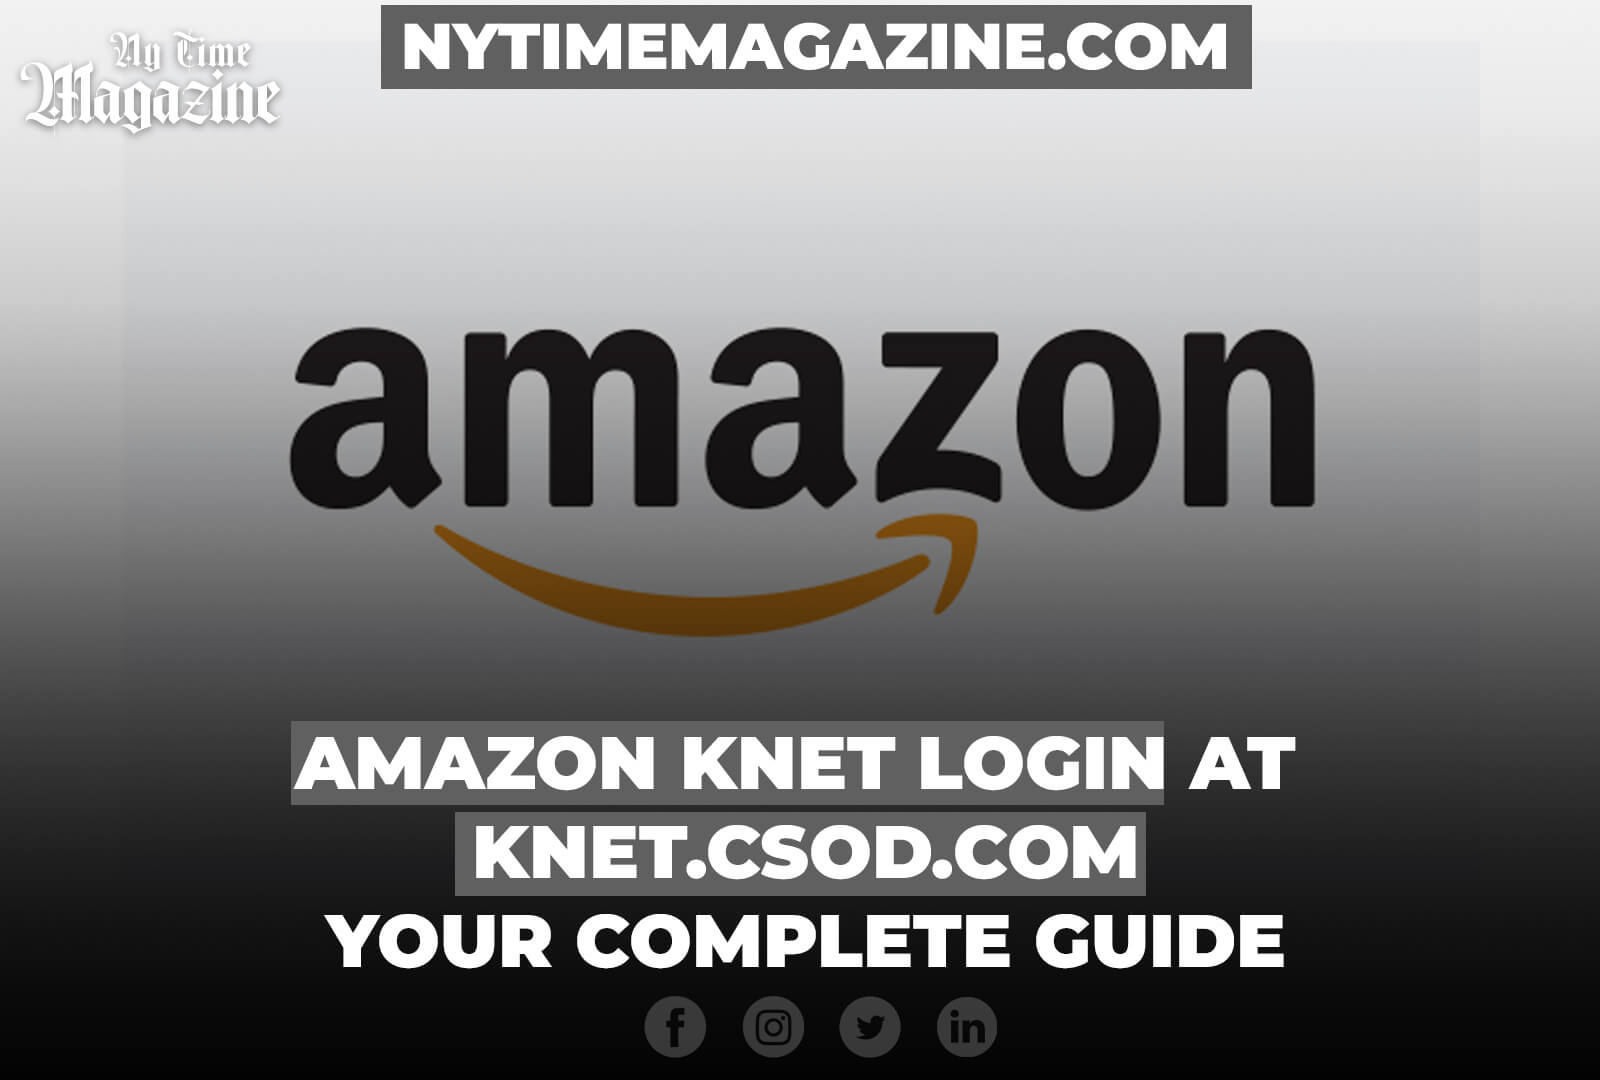 AMAZON KNET LOGIN AT KNET.CSOD.COM – YOUR COMPLETE GUIDE